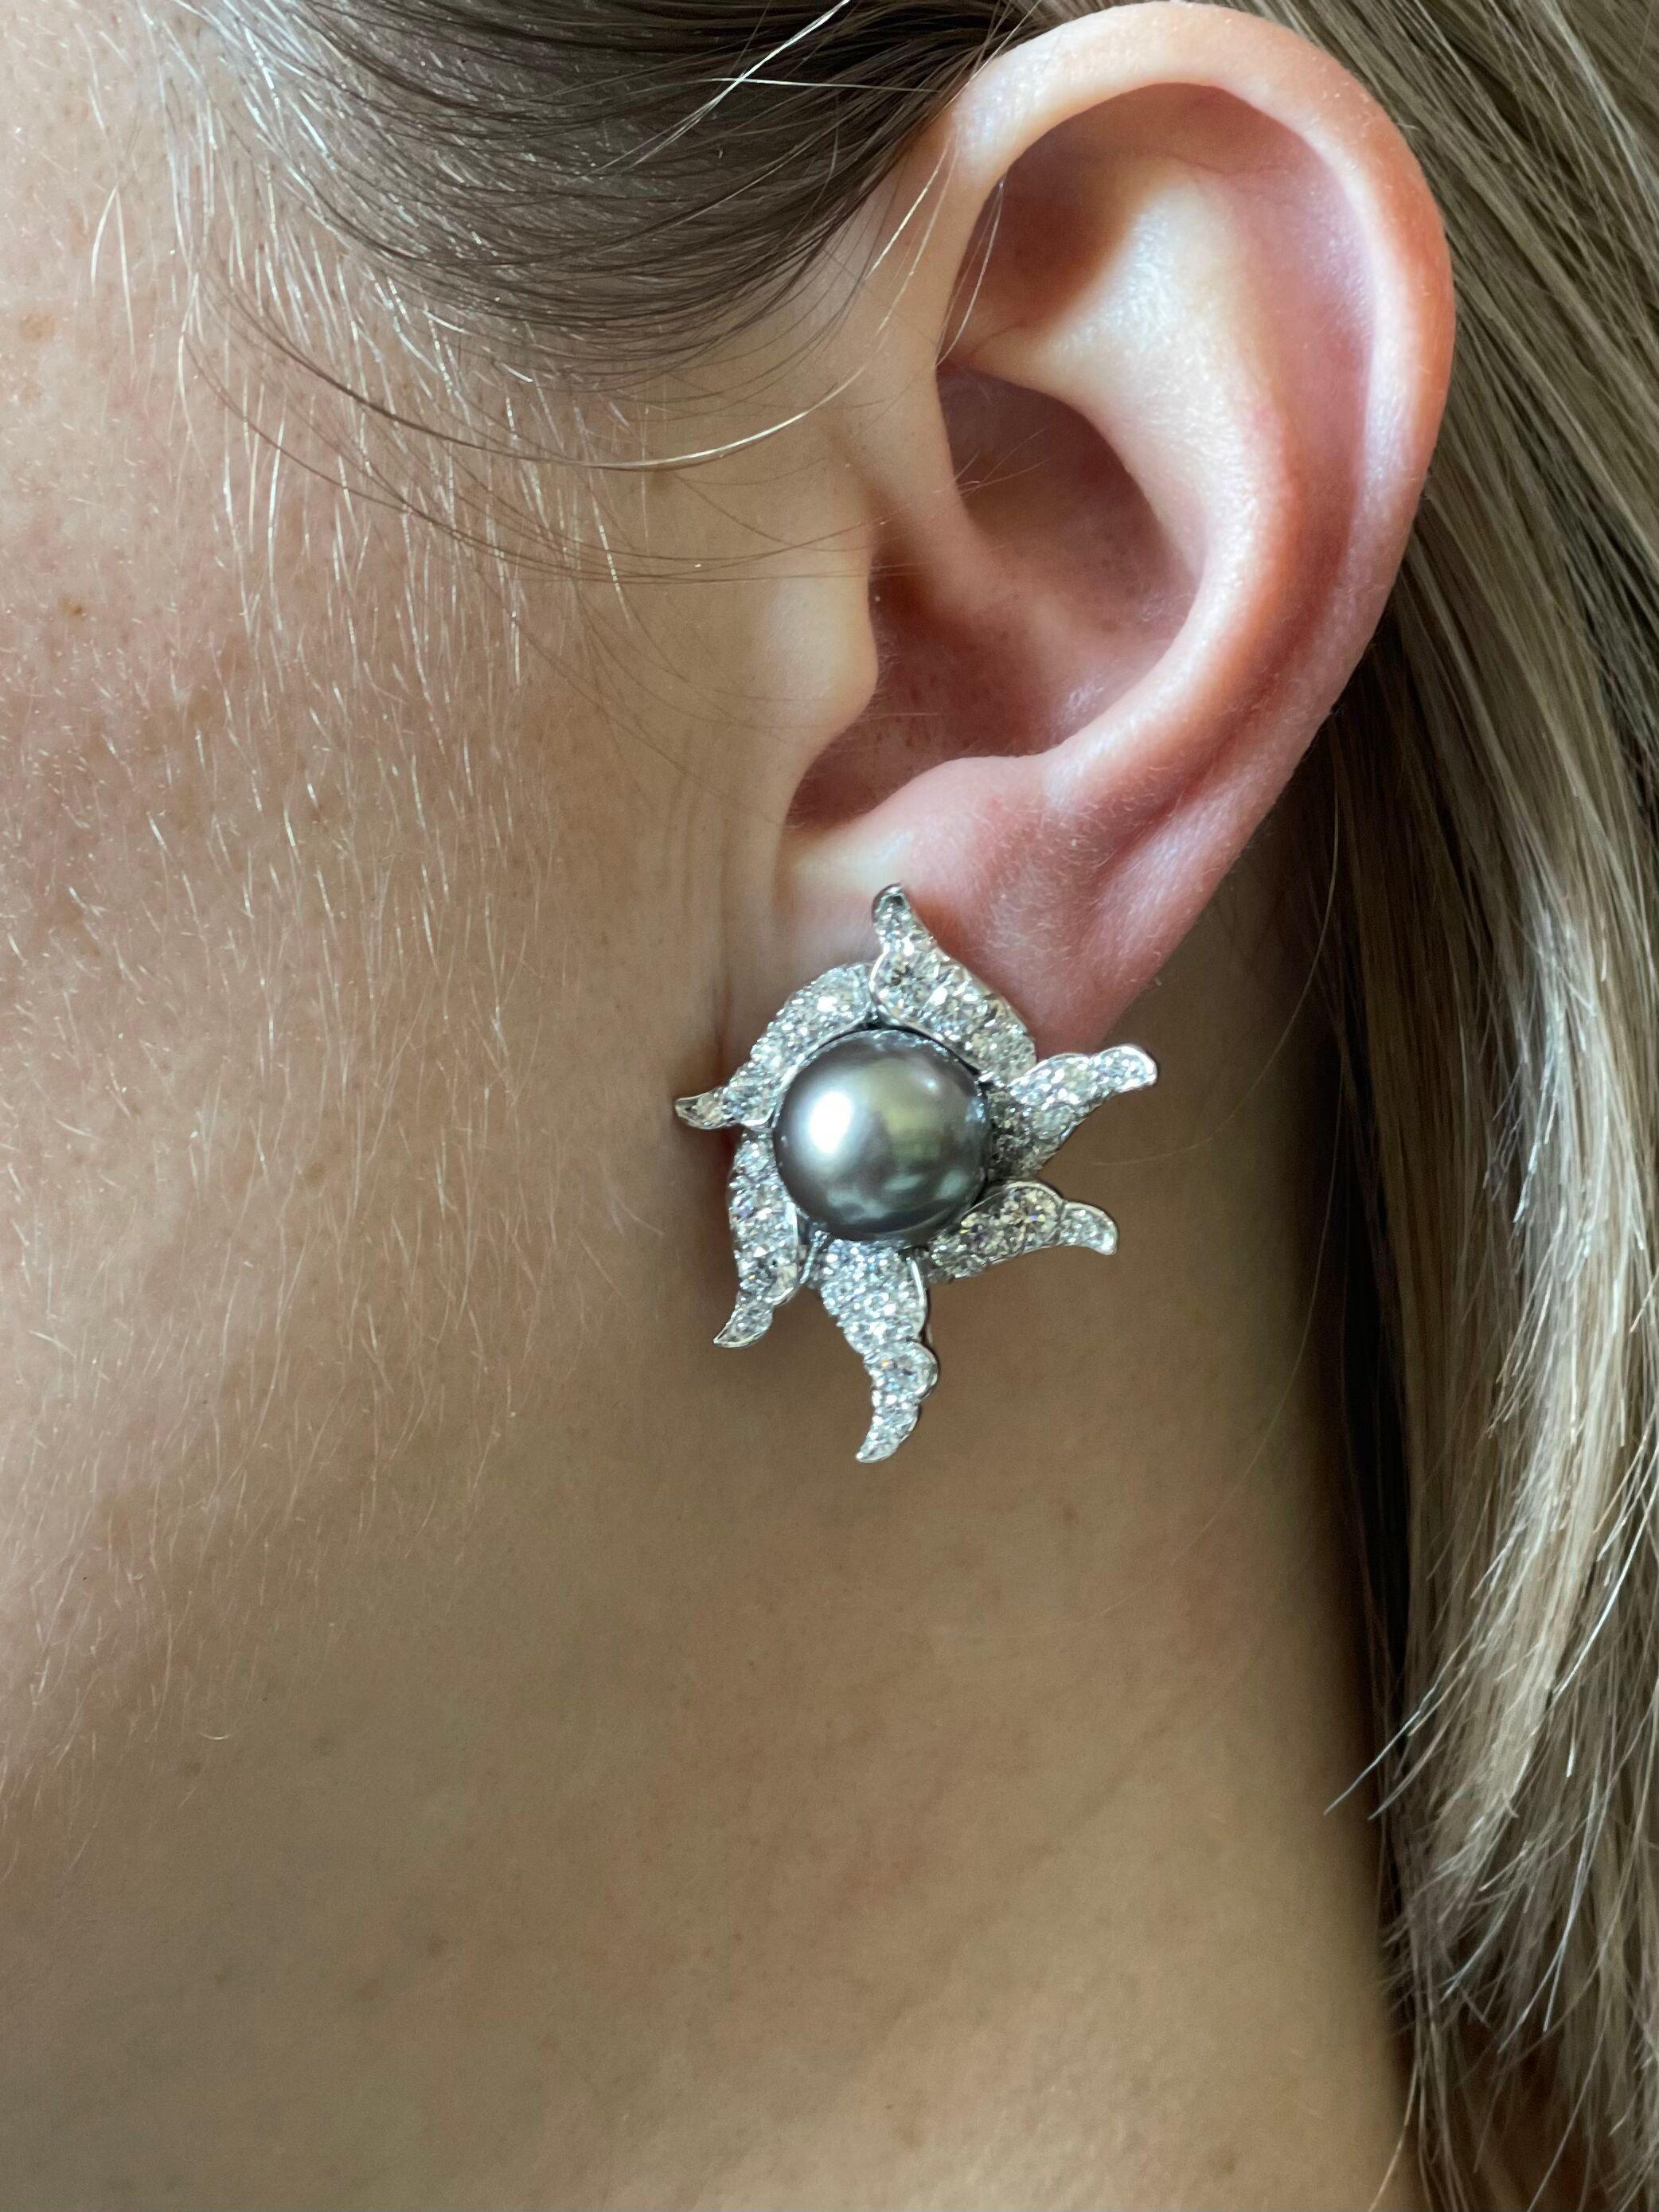 Pair of 18k gold and platinum cocktail earrings by Angela Cummings for Assael, set with approx. 2.20ctw G/VS diamonds and 11.5mm Tahitian South Sea pearls in the center. Earrings measure 1.25